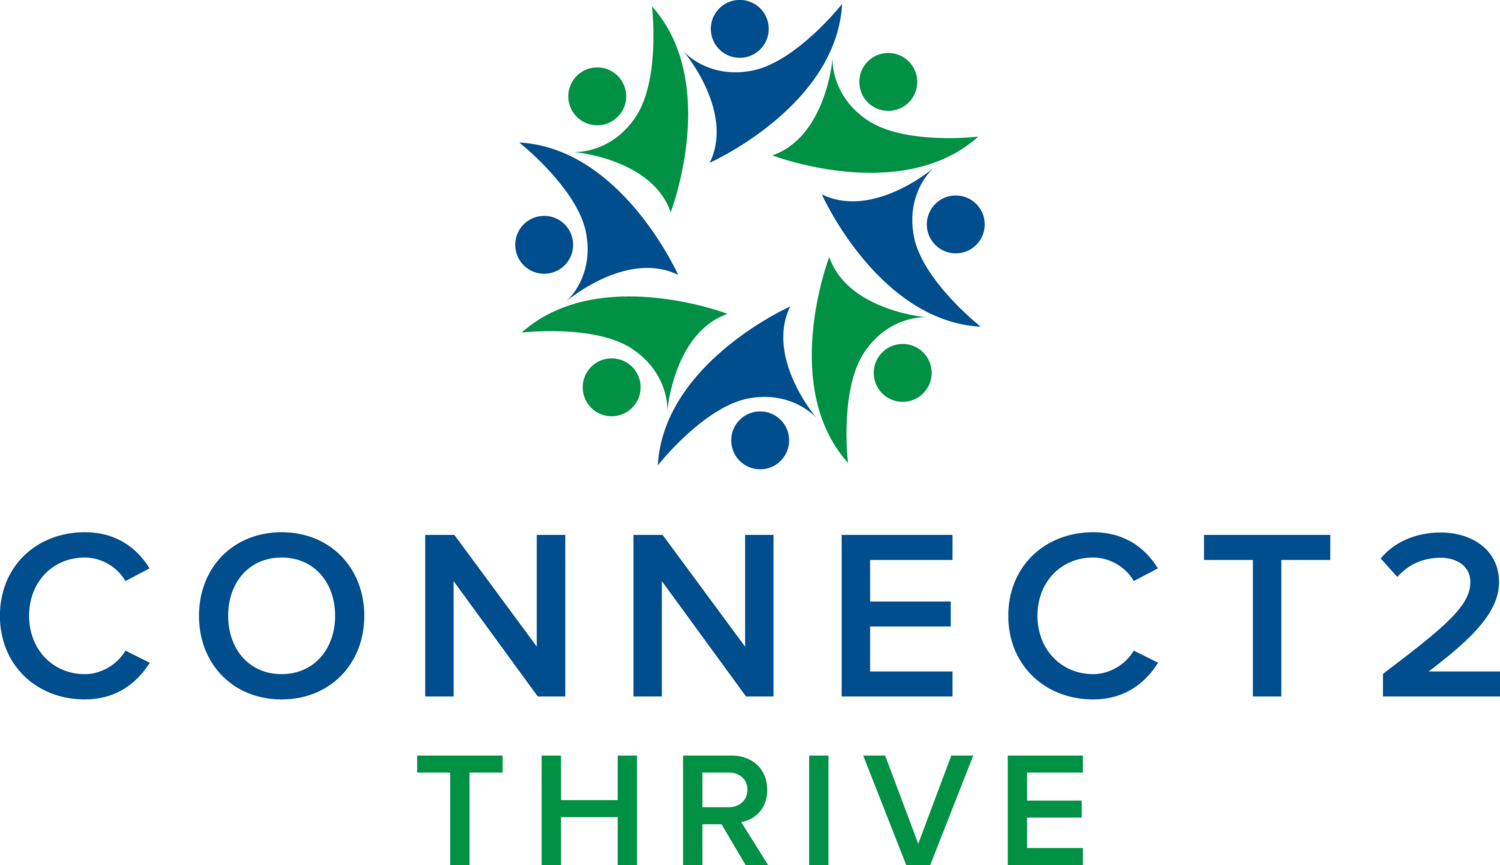 Connect 2 Thrive